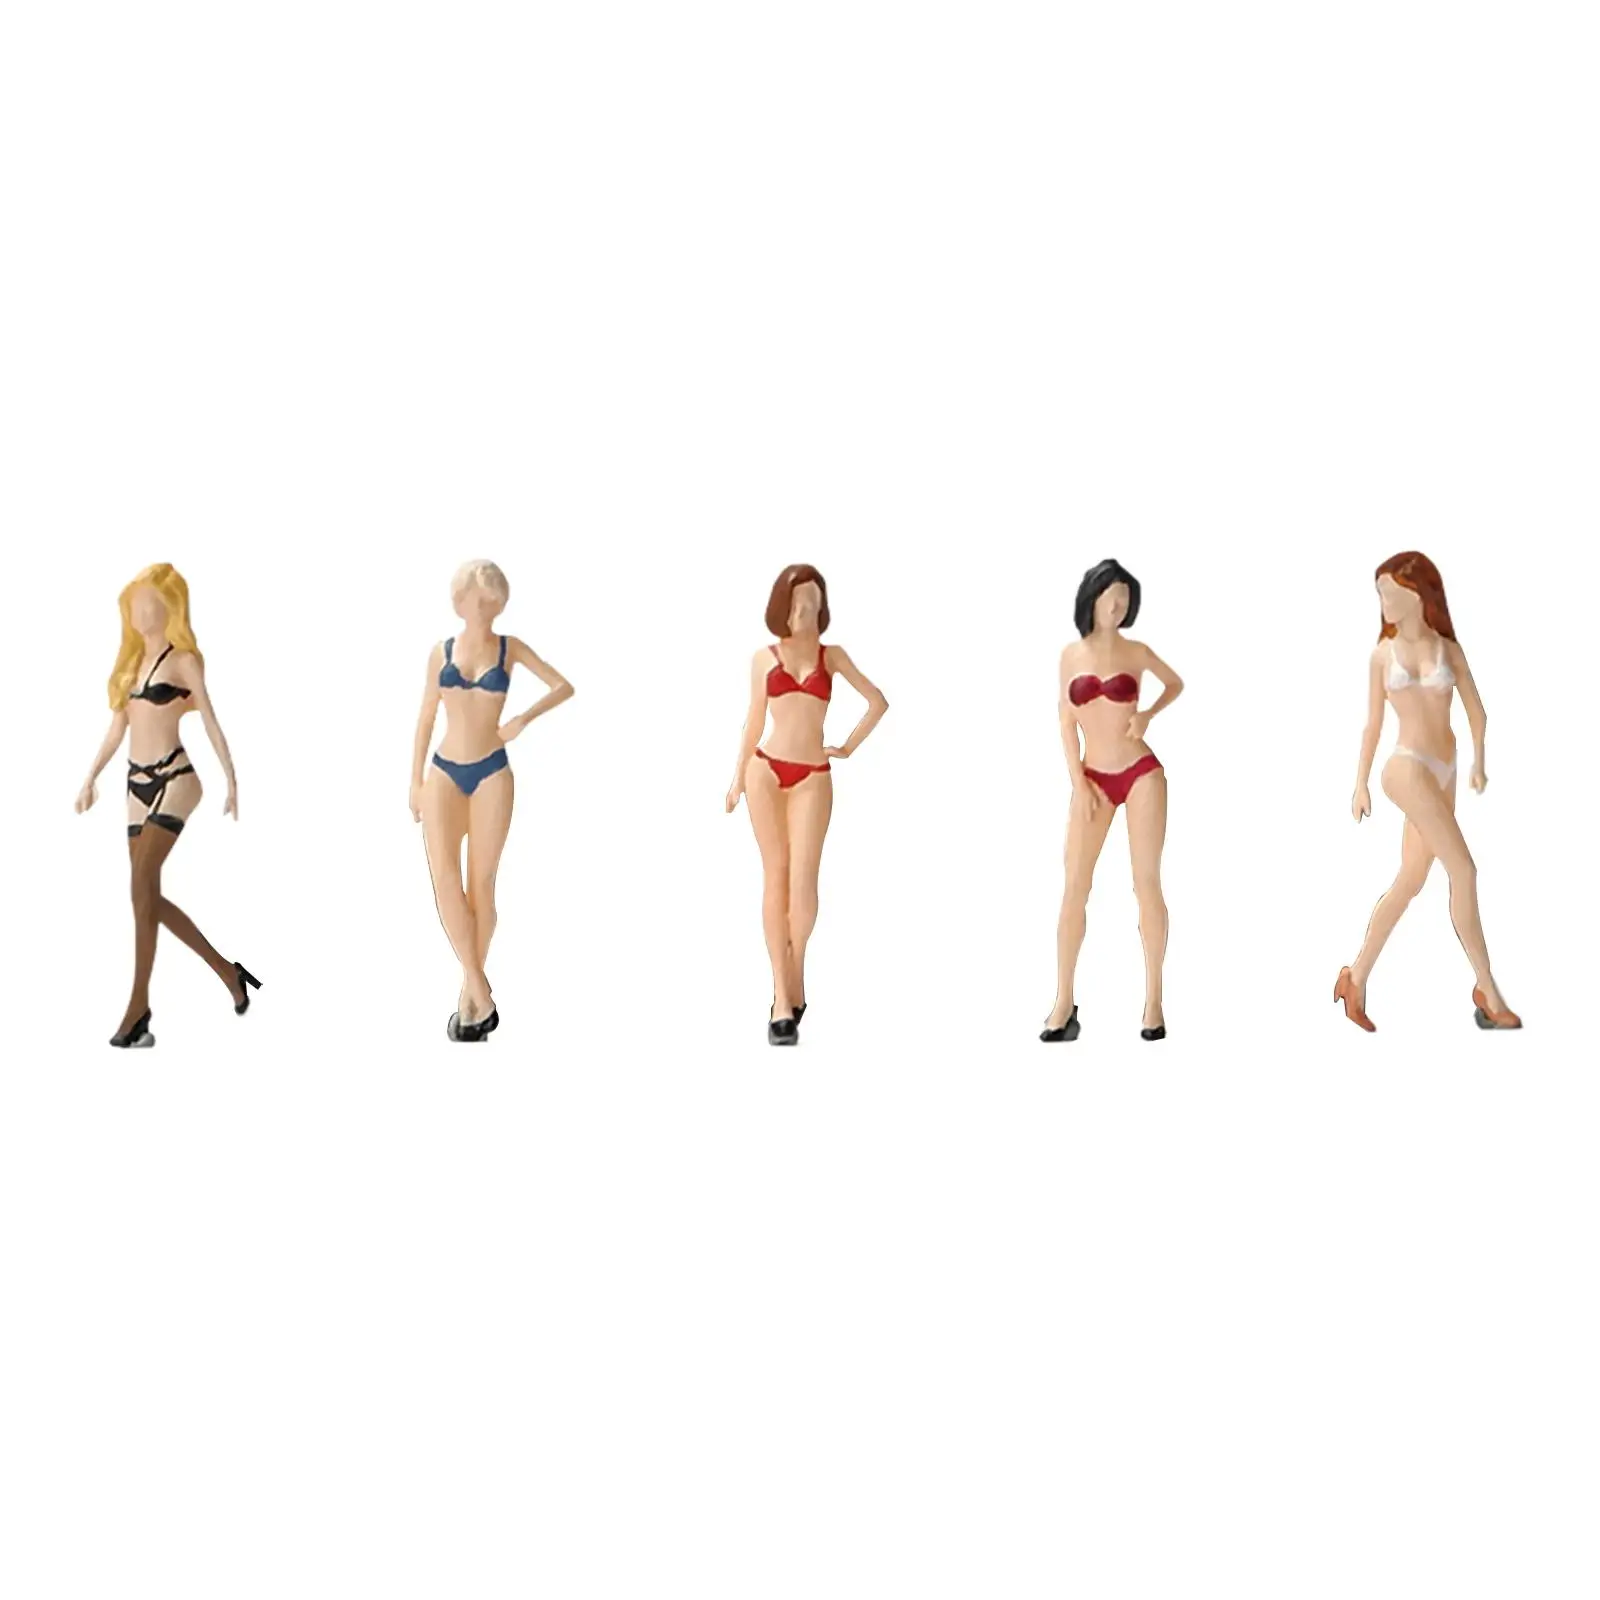 1/64 Scale Model People Figures Miniature People Model 1/64 Female Models Figurine for Sand Table DIY Projects Diorama Layout